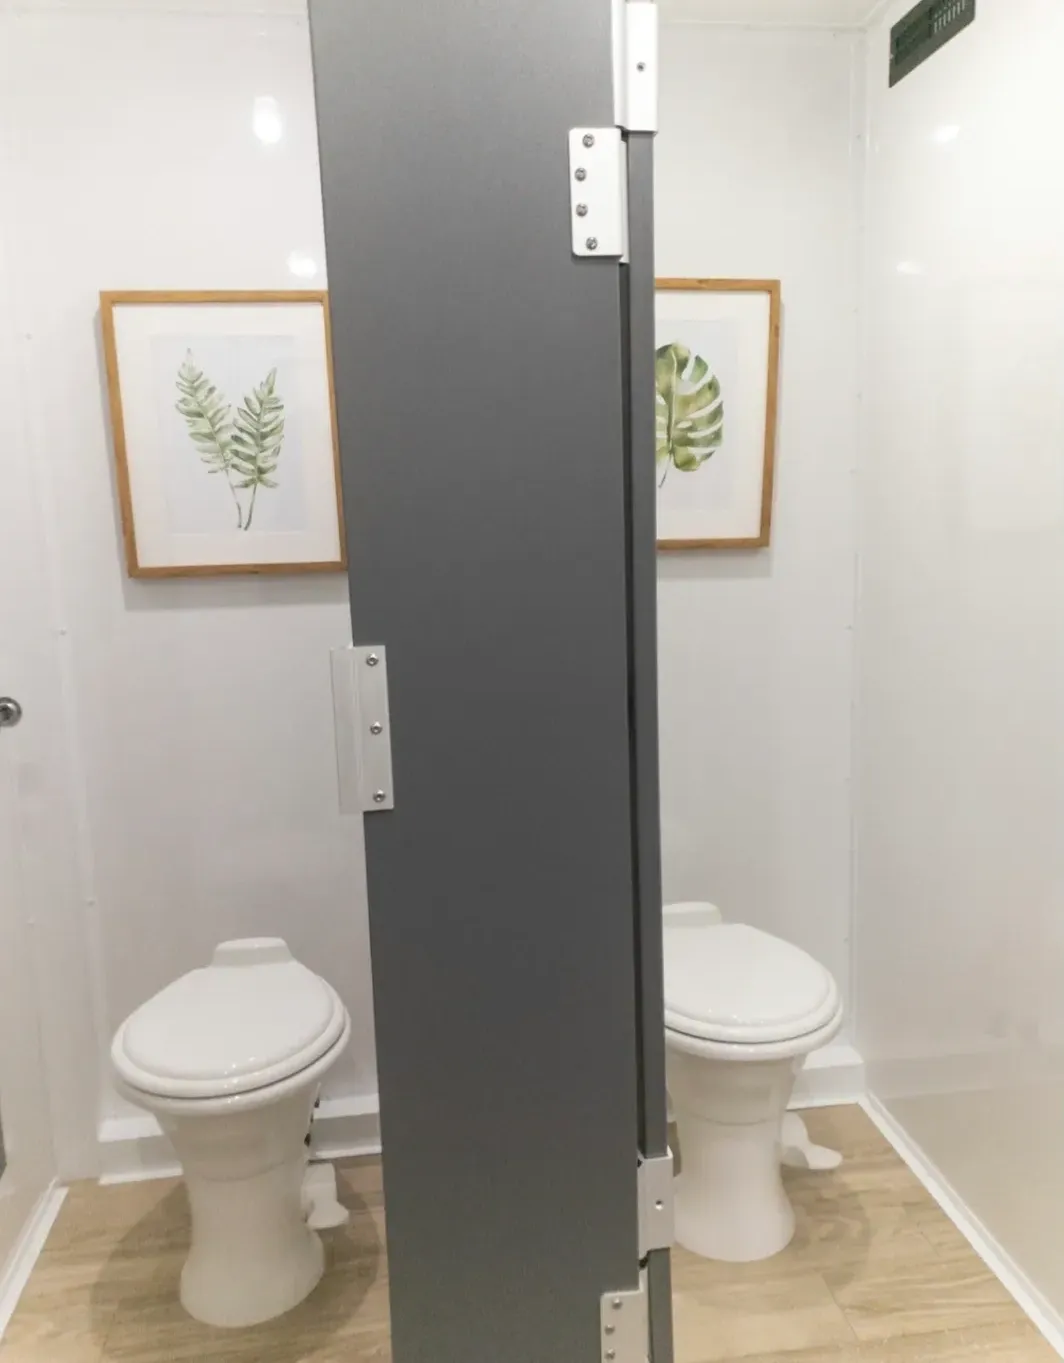 A bathroom with two toilets and a mirror.